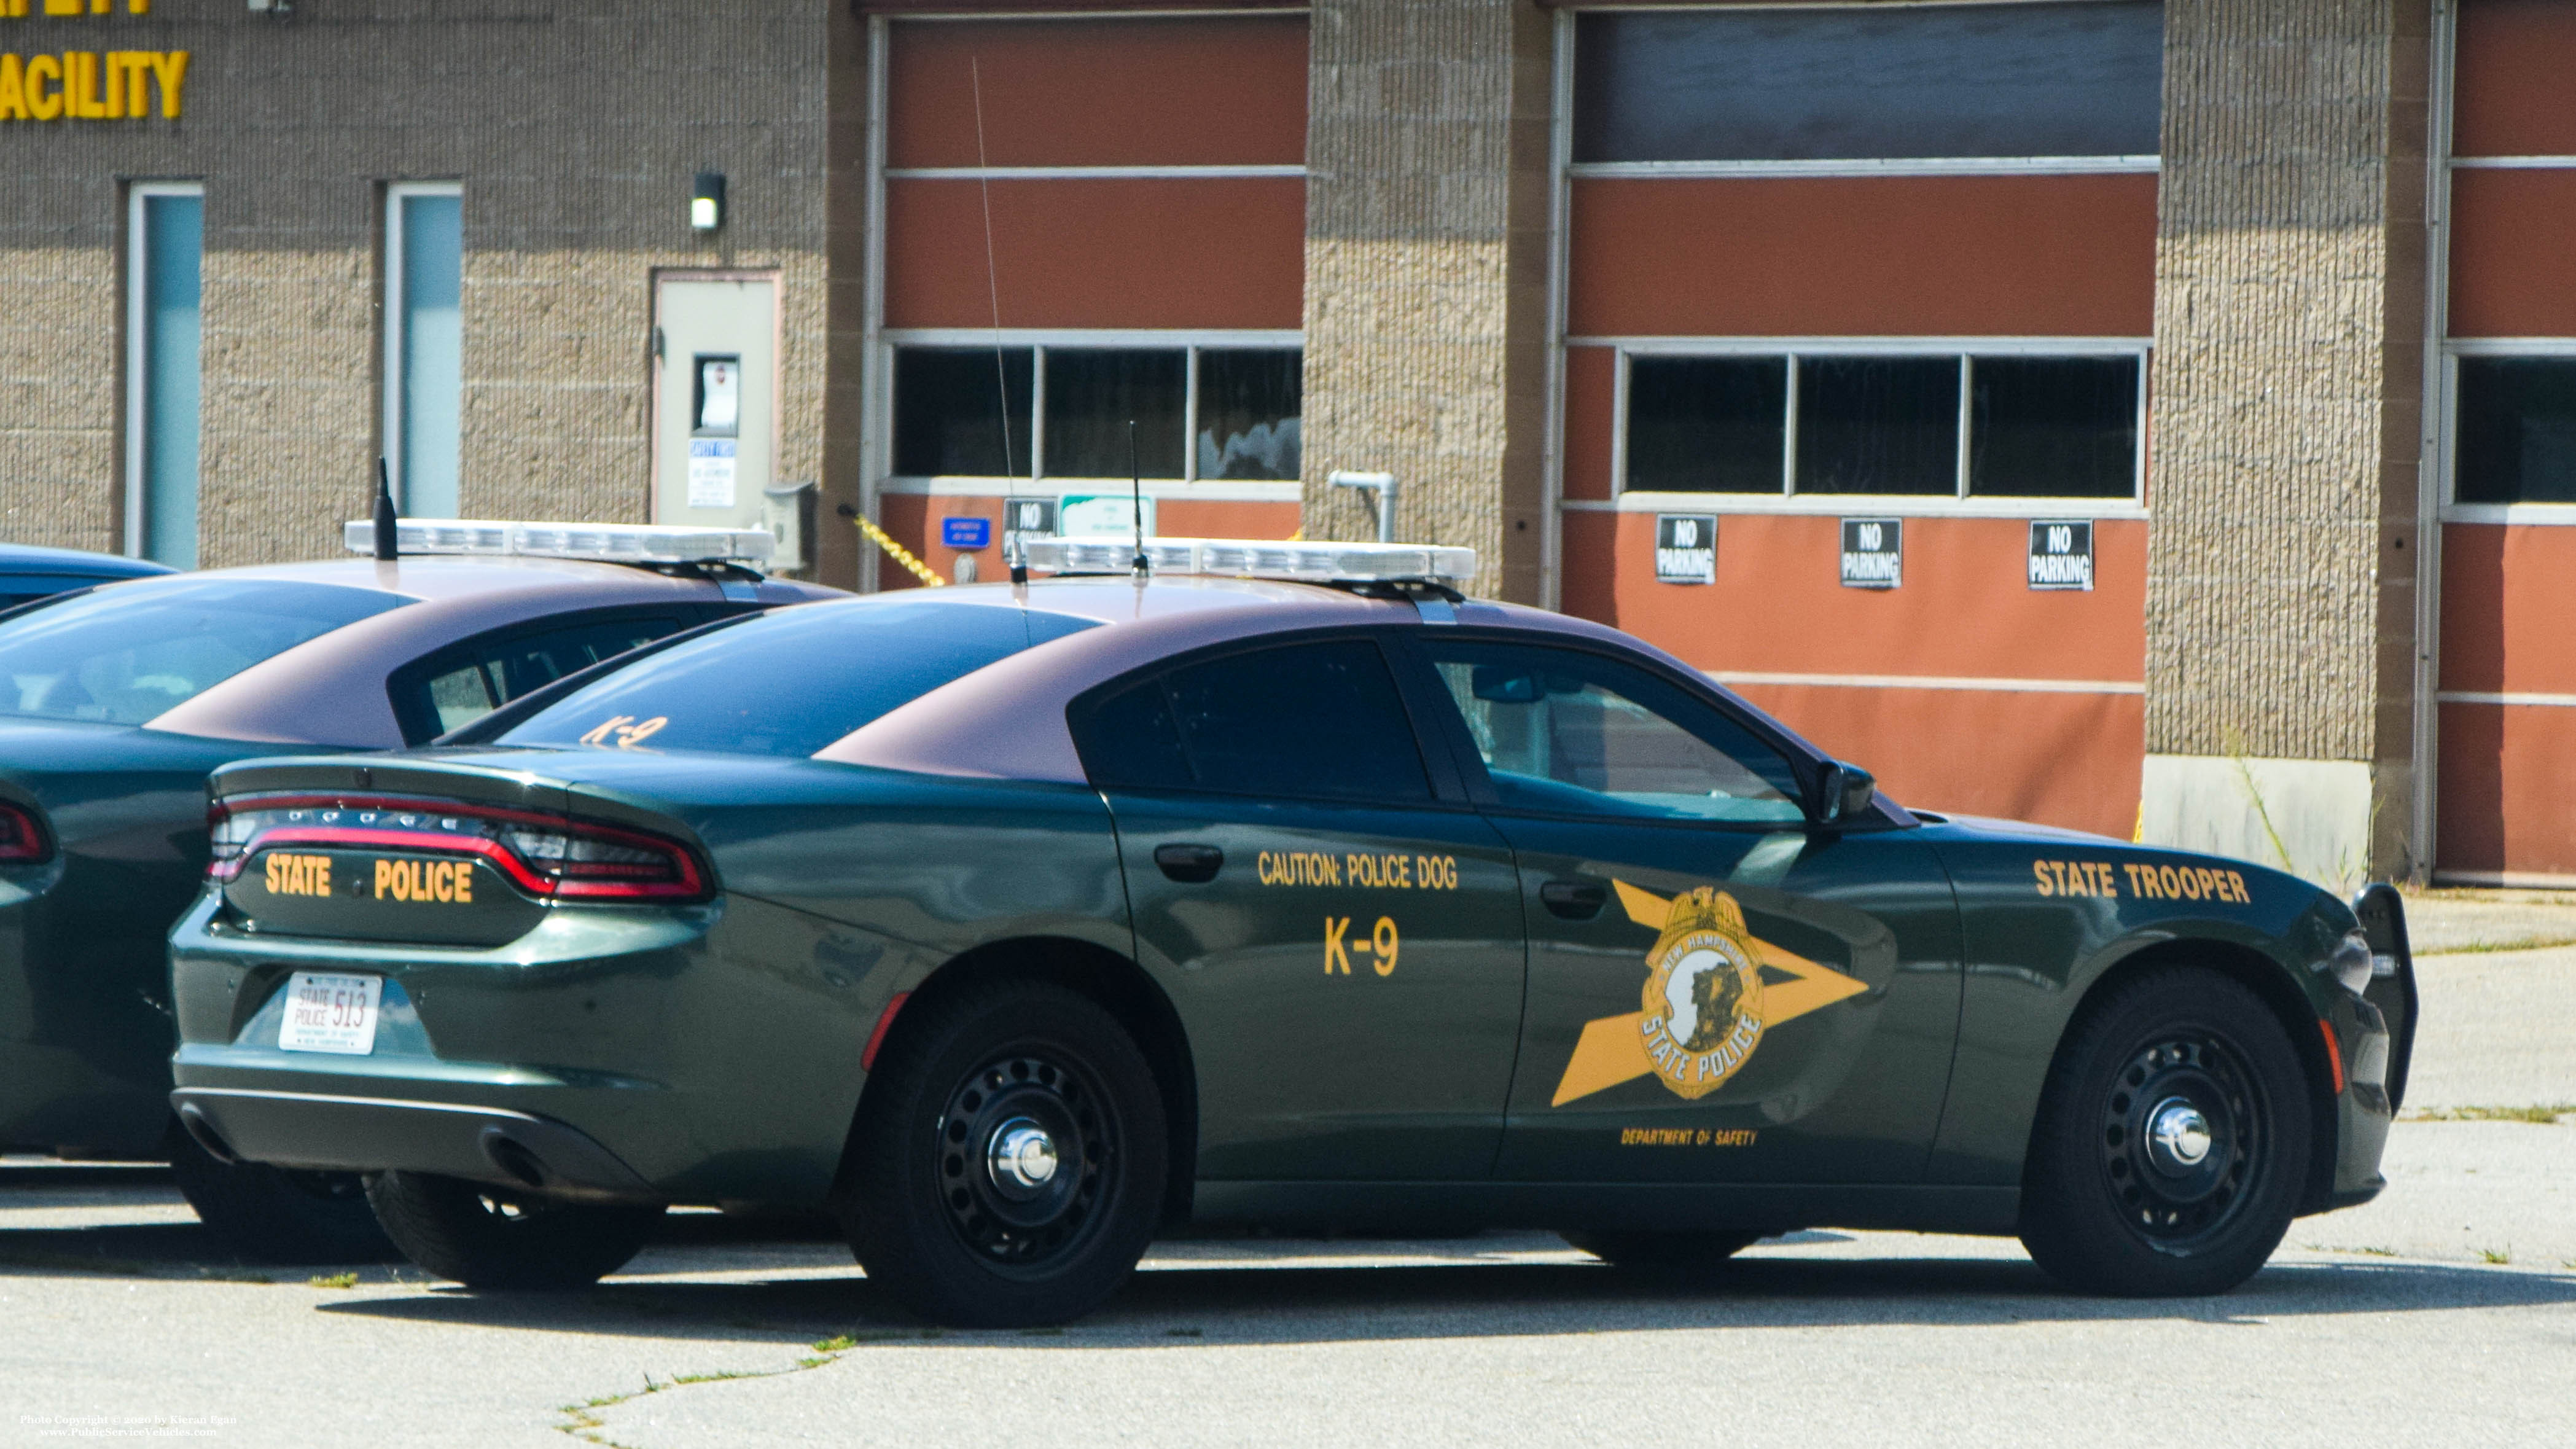 A photo  of New Hampshire State Police
            Cruiser 513, a 2015-2019 Dodge Charger             taken by Kieran Egan